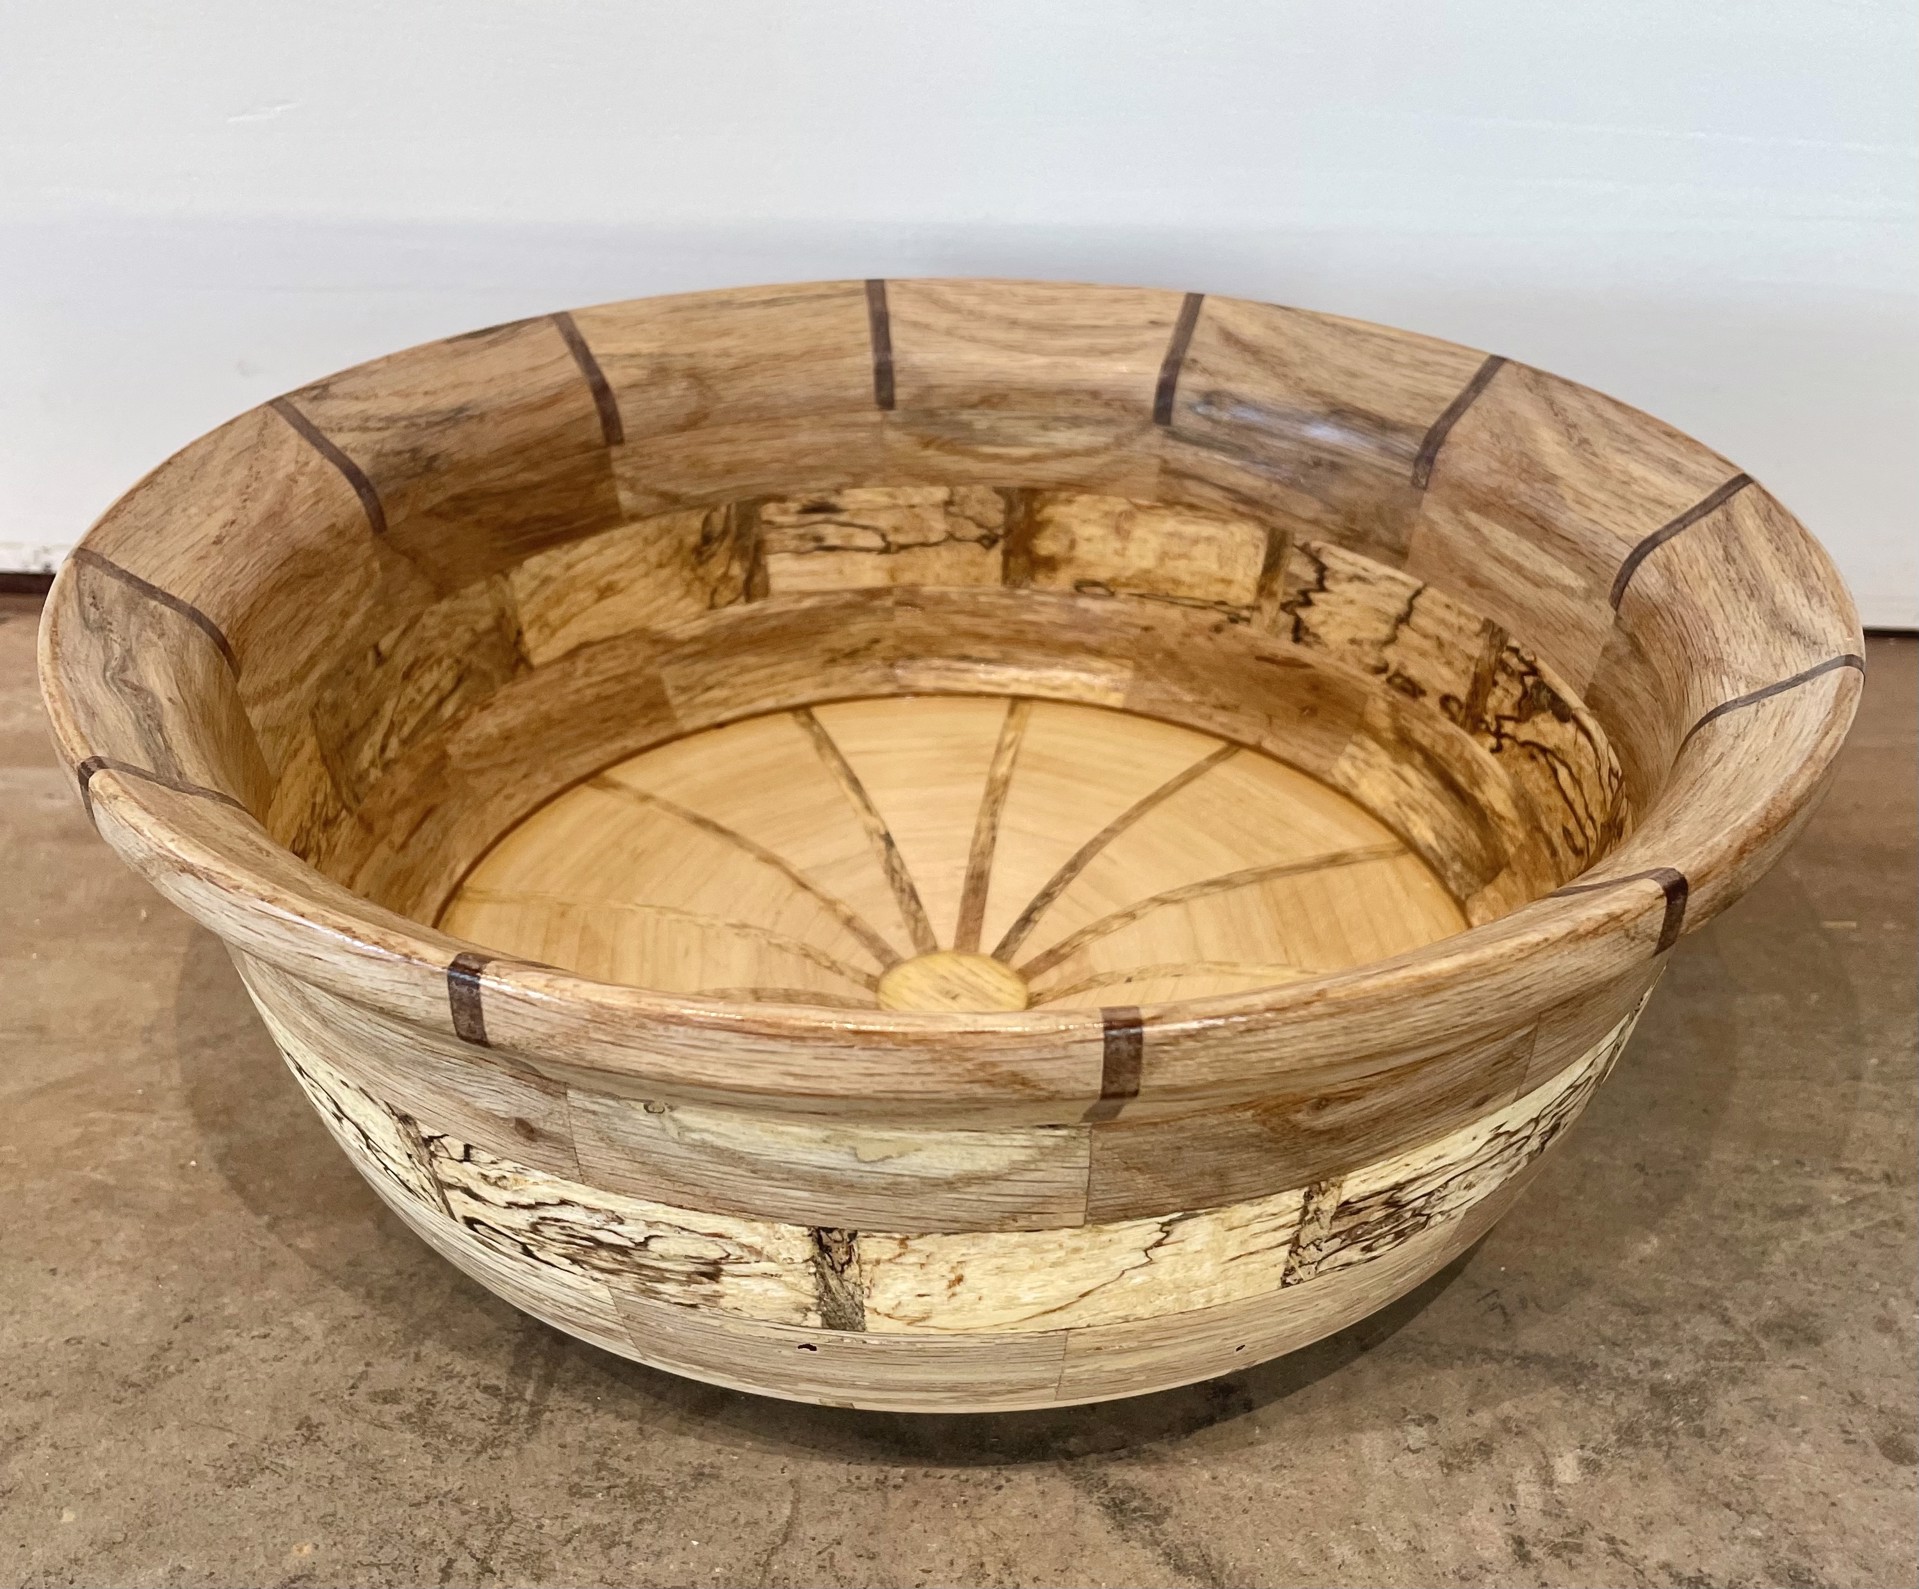 Hand Carved Bowl 9 by William Dunaway